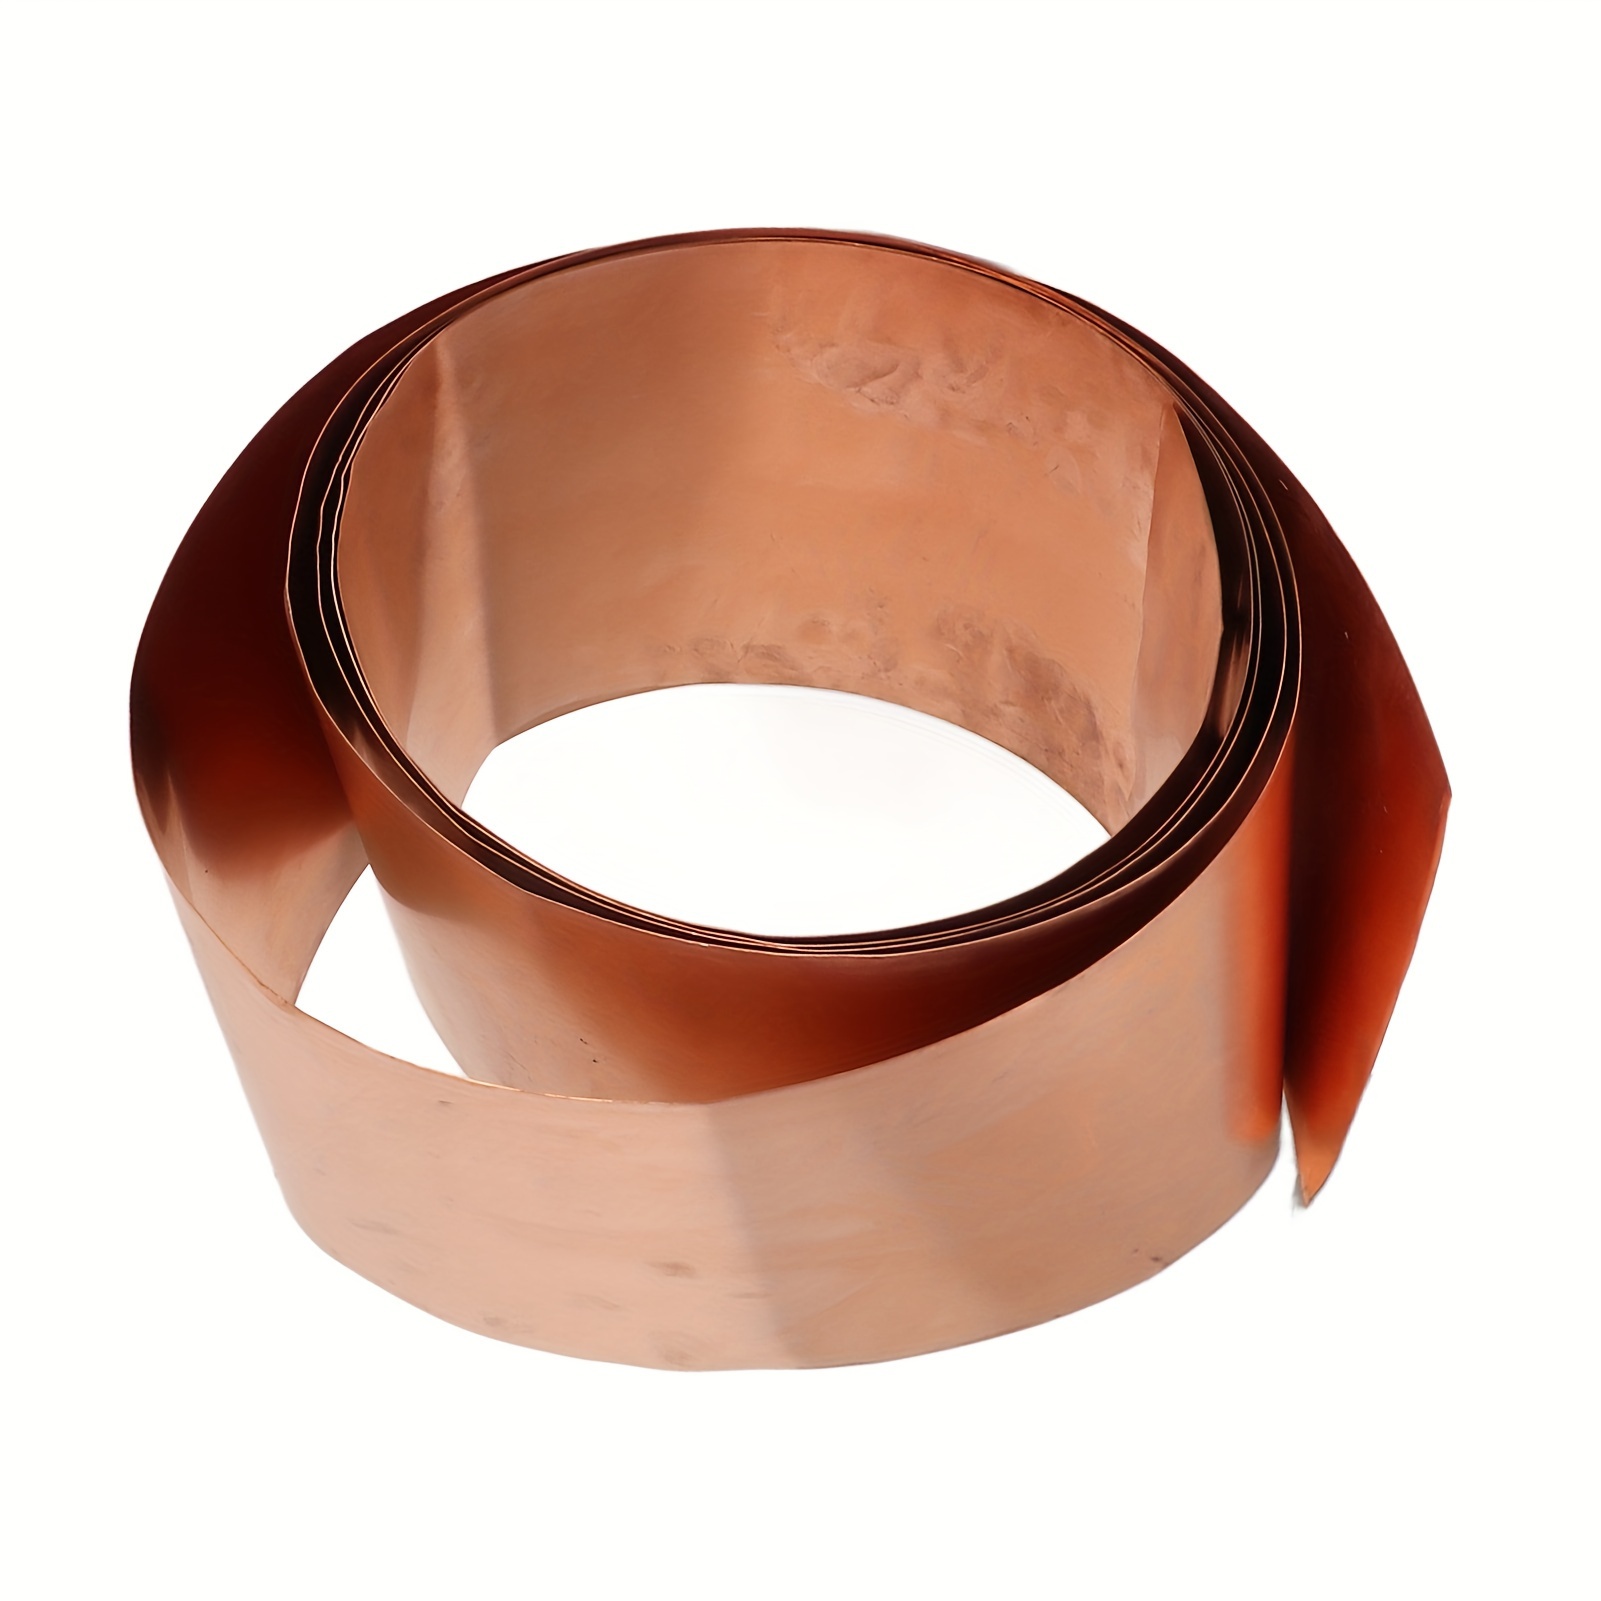 

Copper Flashing Roll 0.5mmx200mmx3m/0.02inx7.87inx9.8ft 99.95% Pure Copper Sheet Roofing Flashing Roll Copper Flashing General Use Or Roofing Flashing Roll - Diy Project Or Contractor